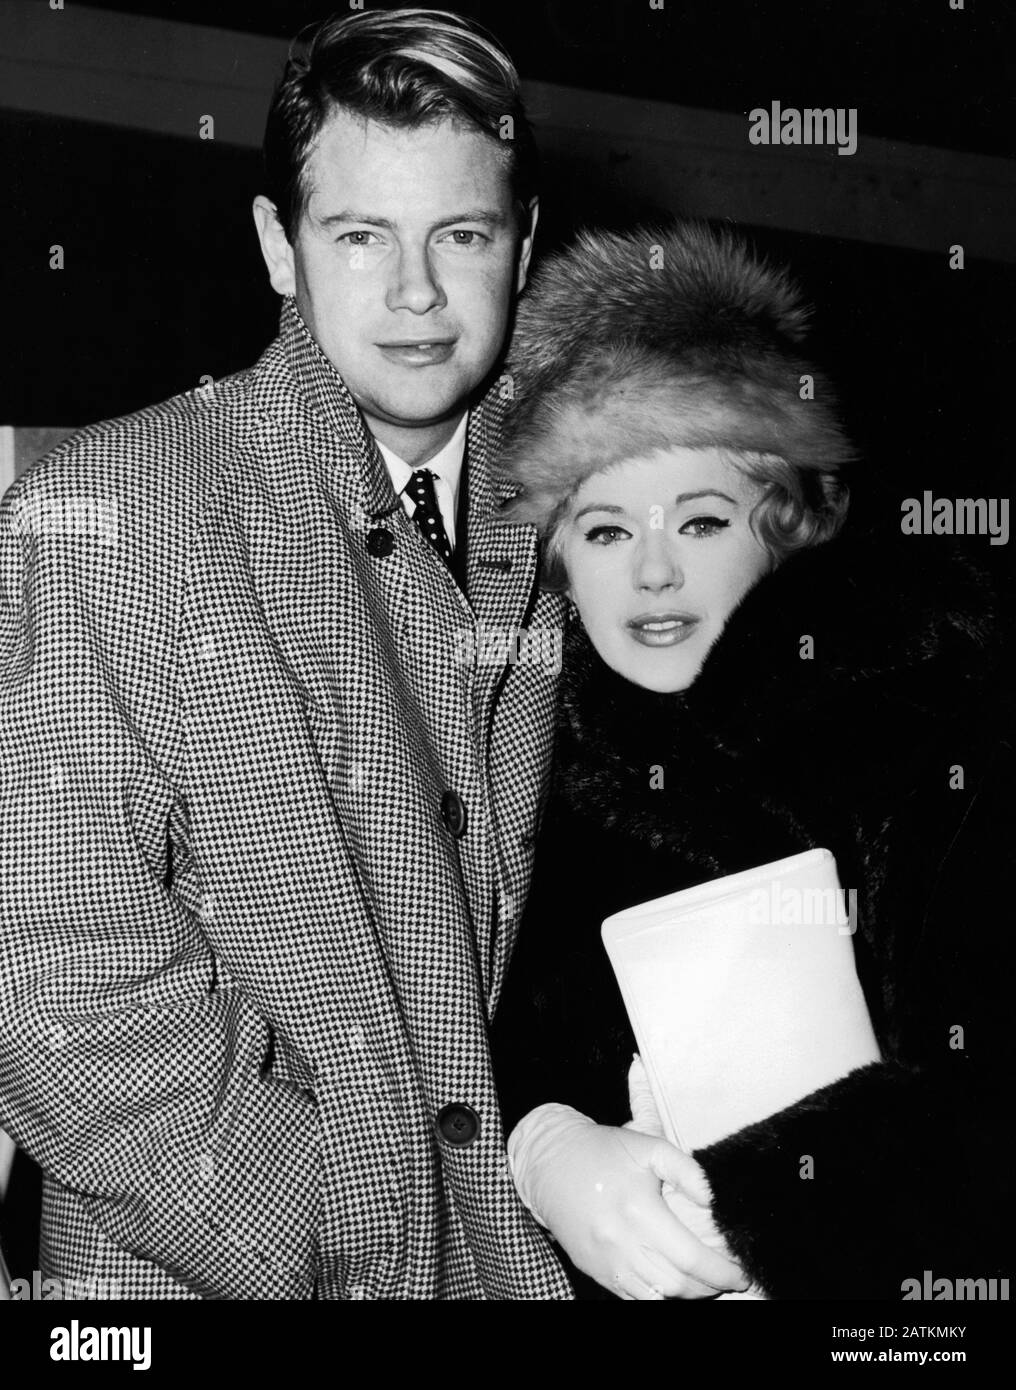 Troy Donahue and Connie Stevens (circa 1962) Cinema Legacy Collection  File Reference # 33962-190THA Stock Photo